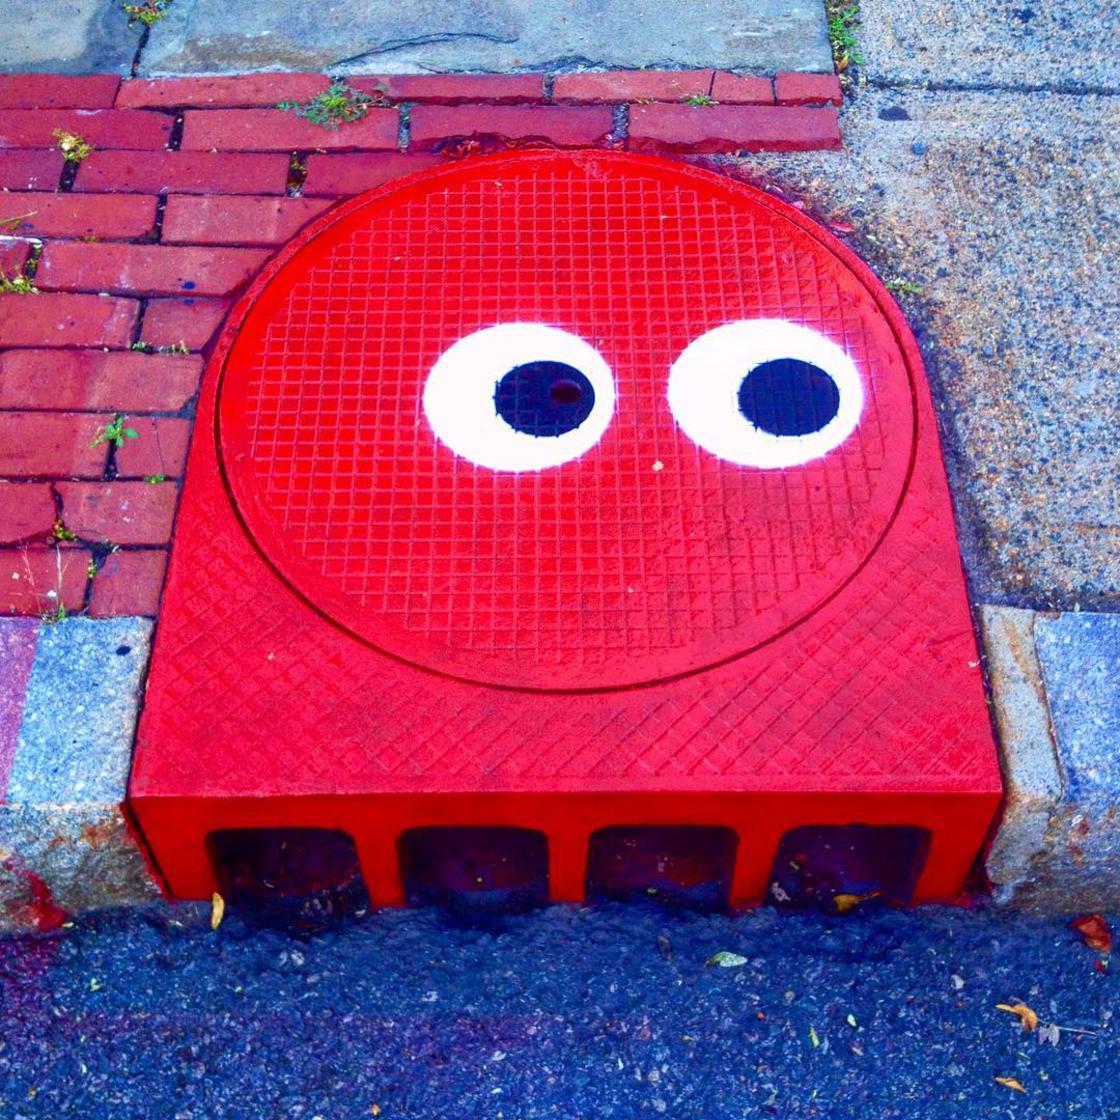 Sewer manhole cover that has been painted to look like a cute red squid with googly eyes